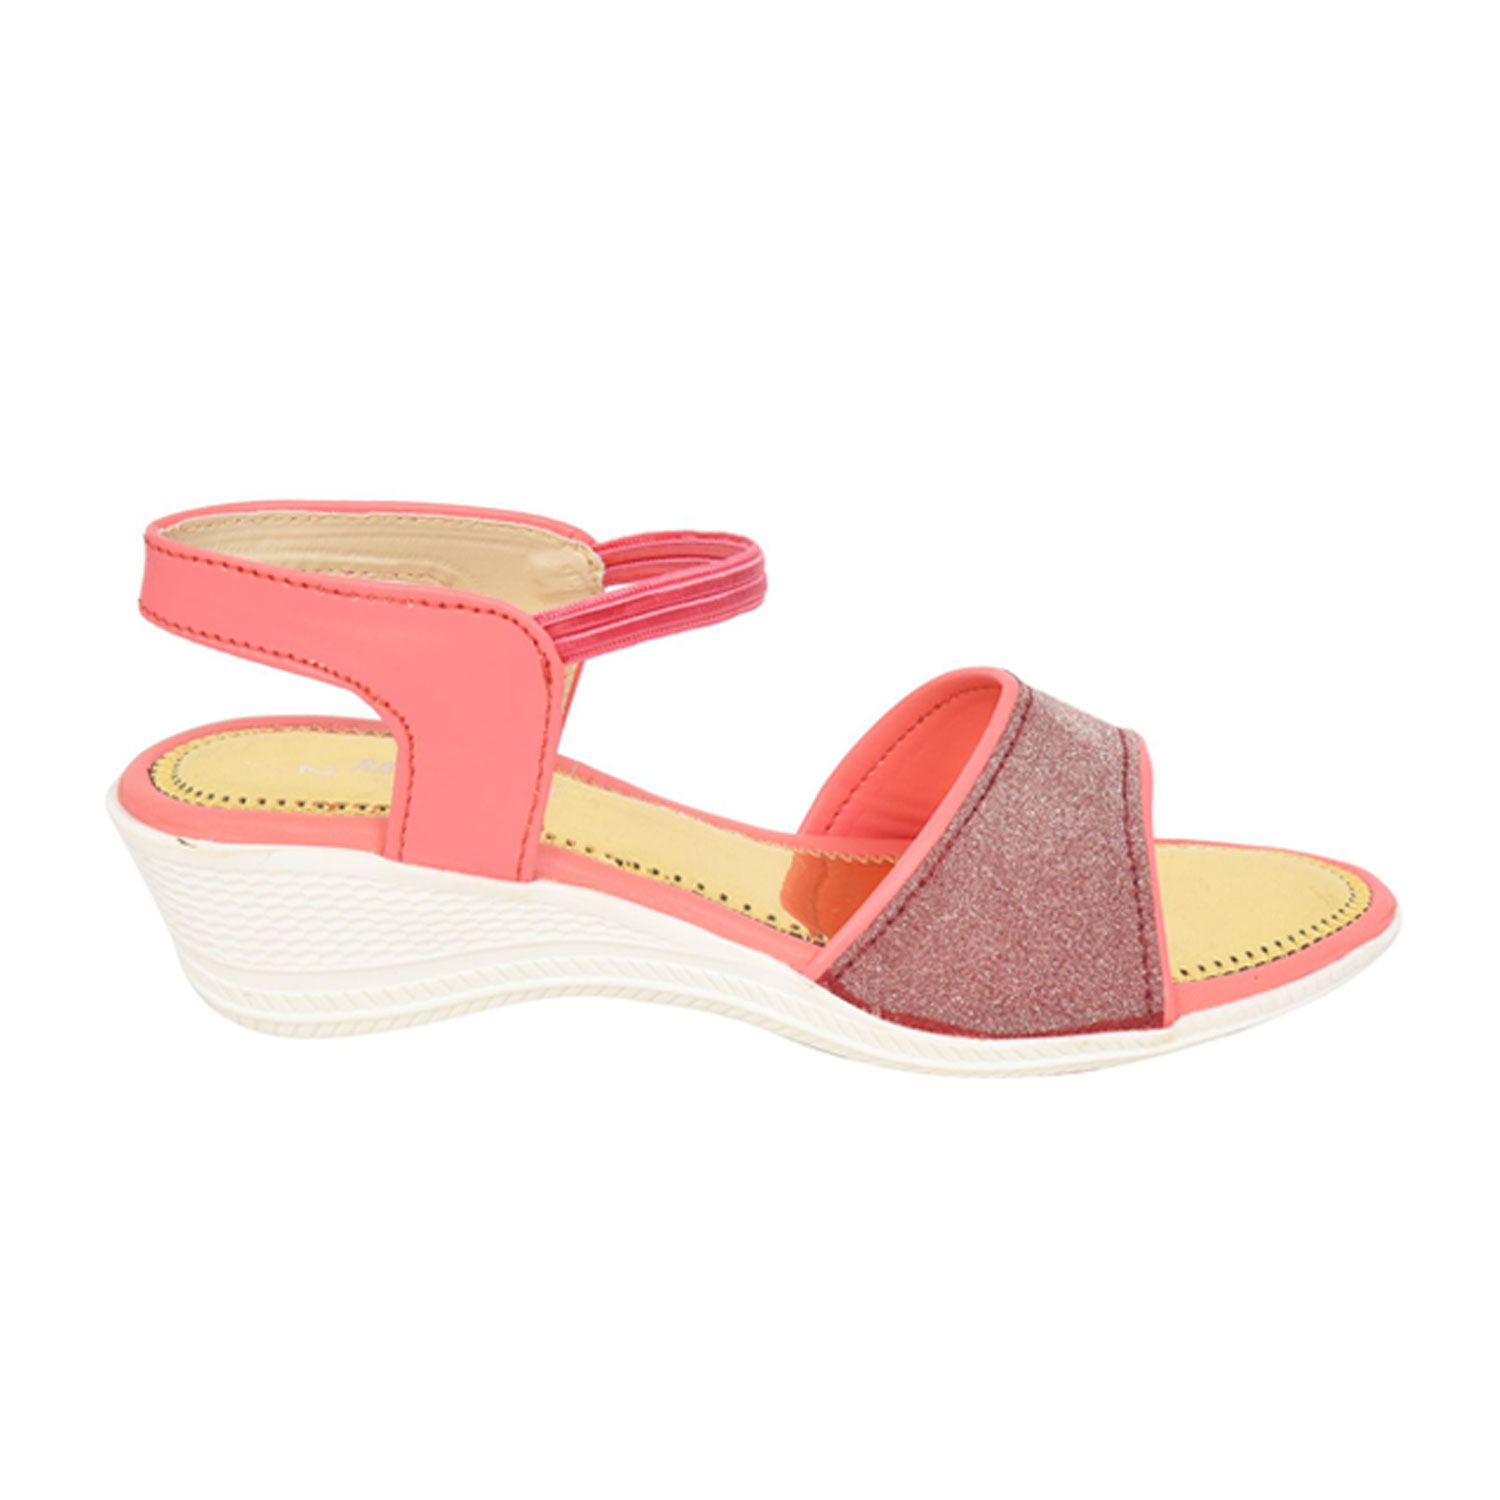 Racecourse Girl's Wedges Heel Glitter Sparkle News Sandal With the Heel Height of 1.5 Inch 3010 Pink(Pack of 8)